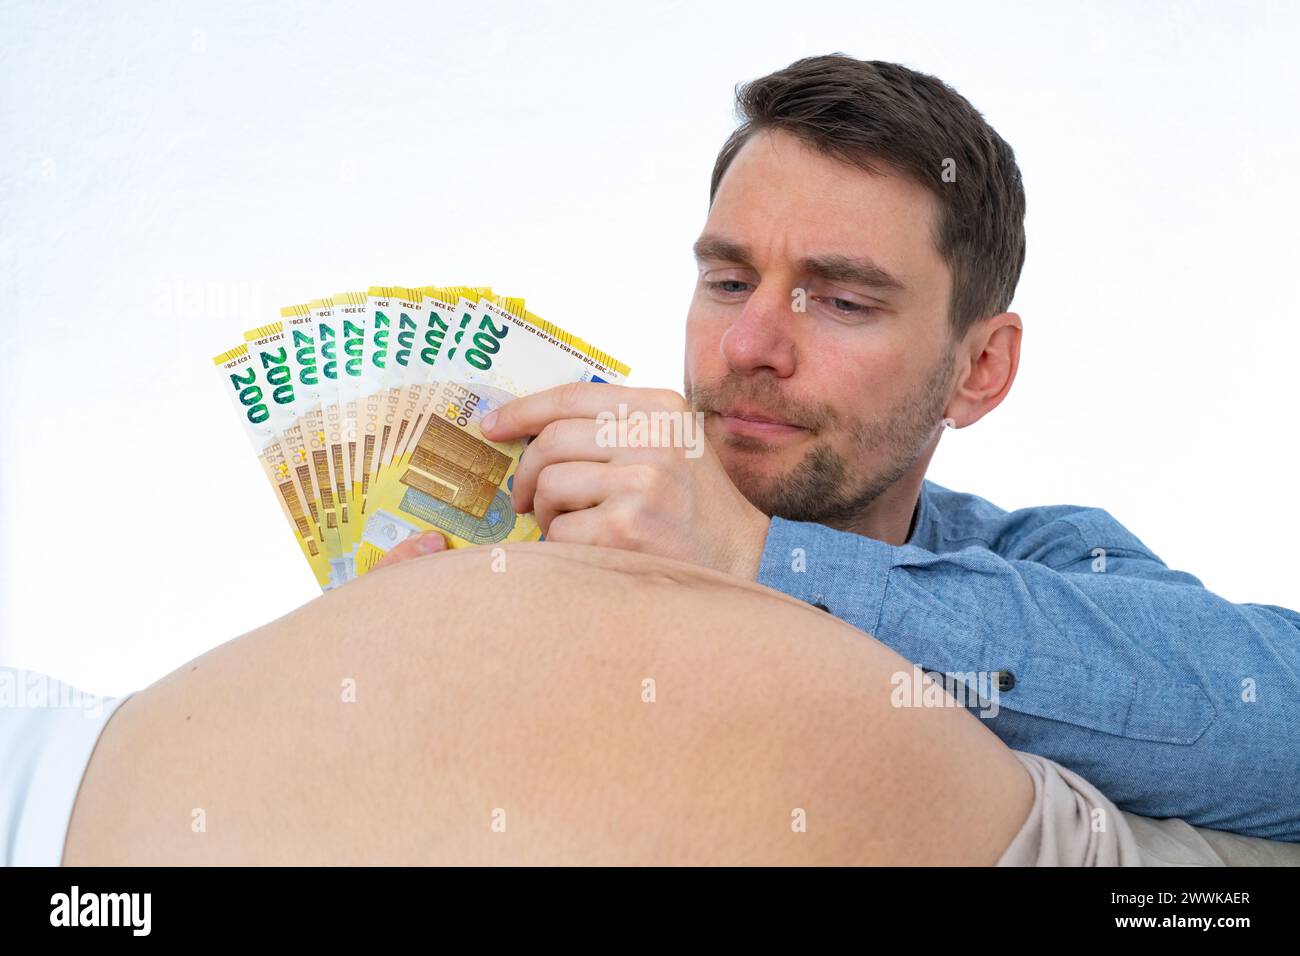 Description: Thoughtful father is mentally counting out expenses for the baby and pulling out banknotes of his hand while looking at his wife's pregna Stock Photo